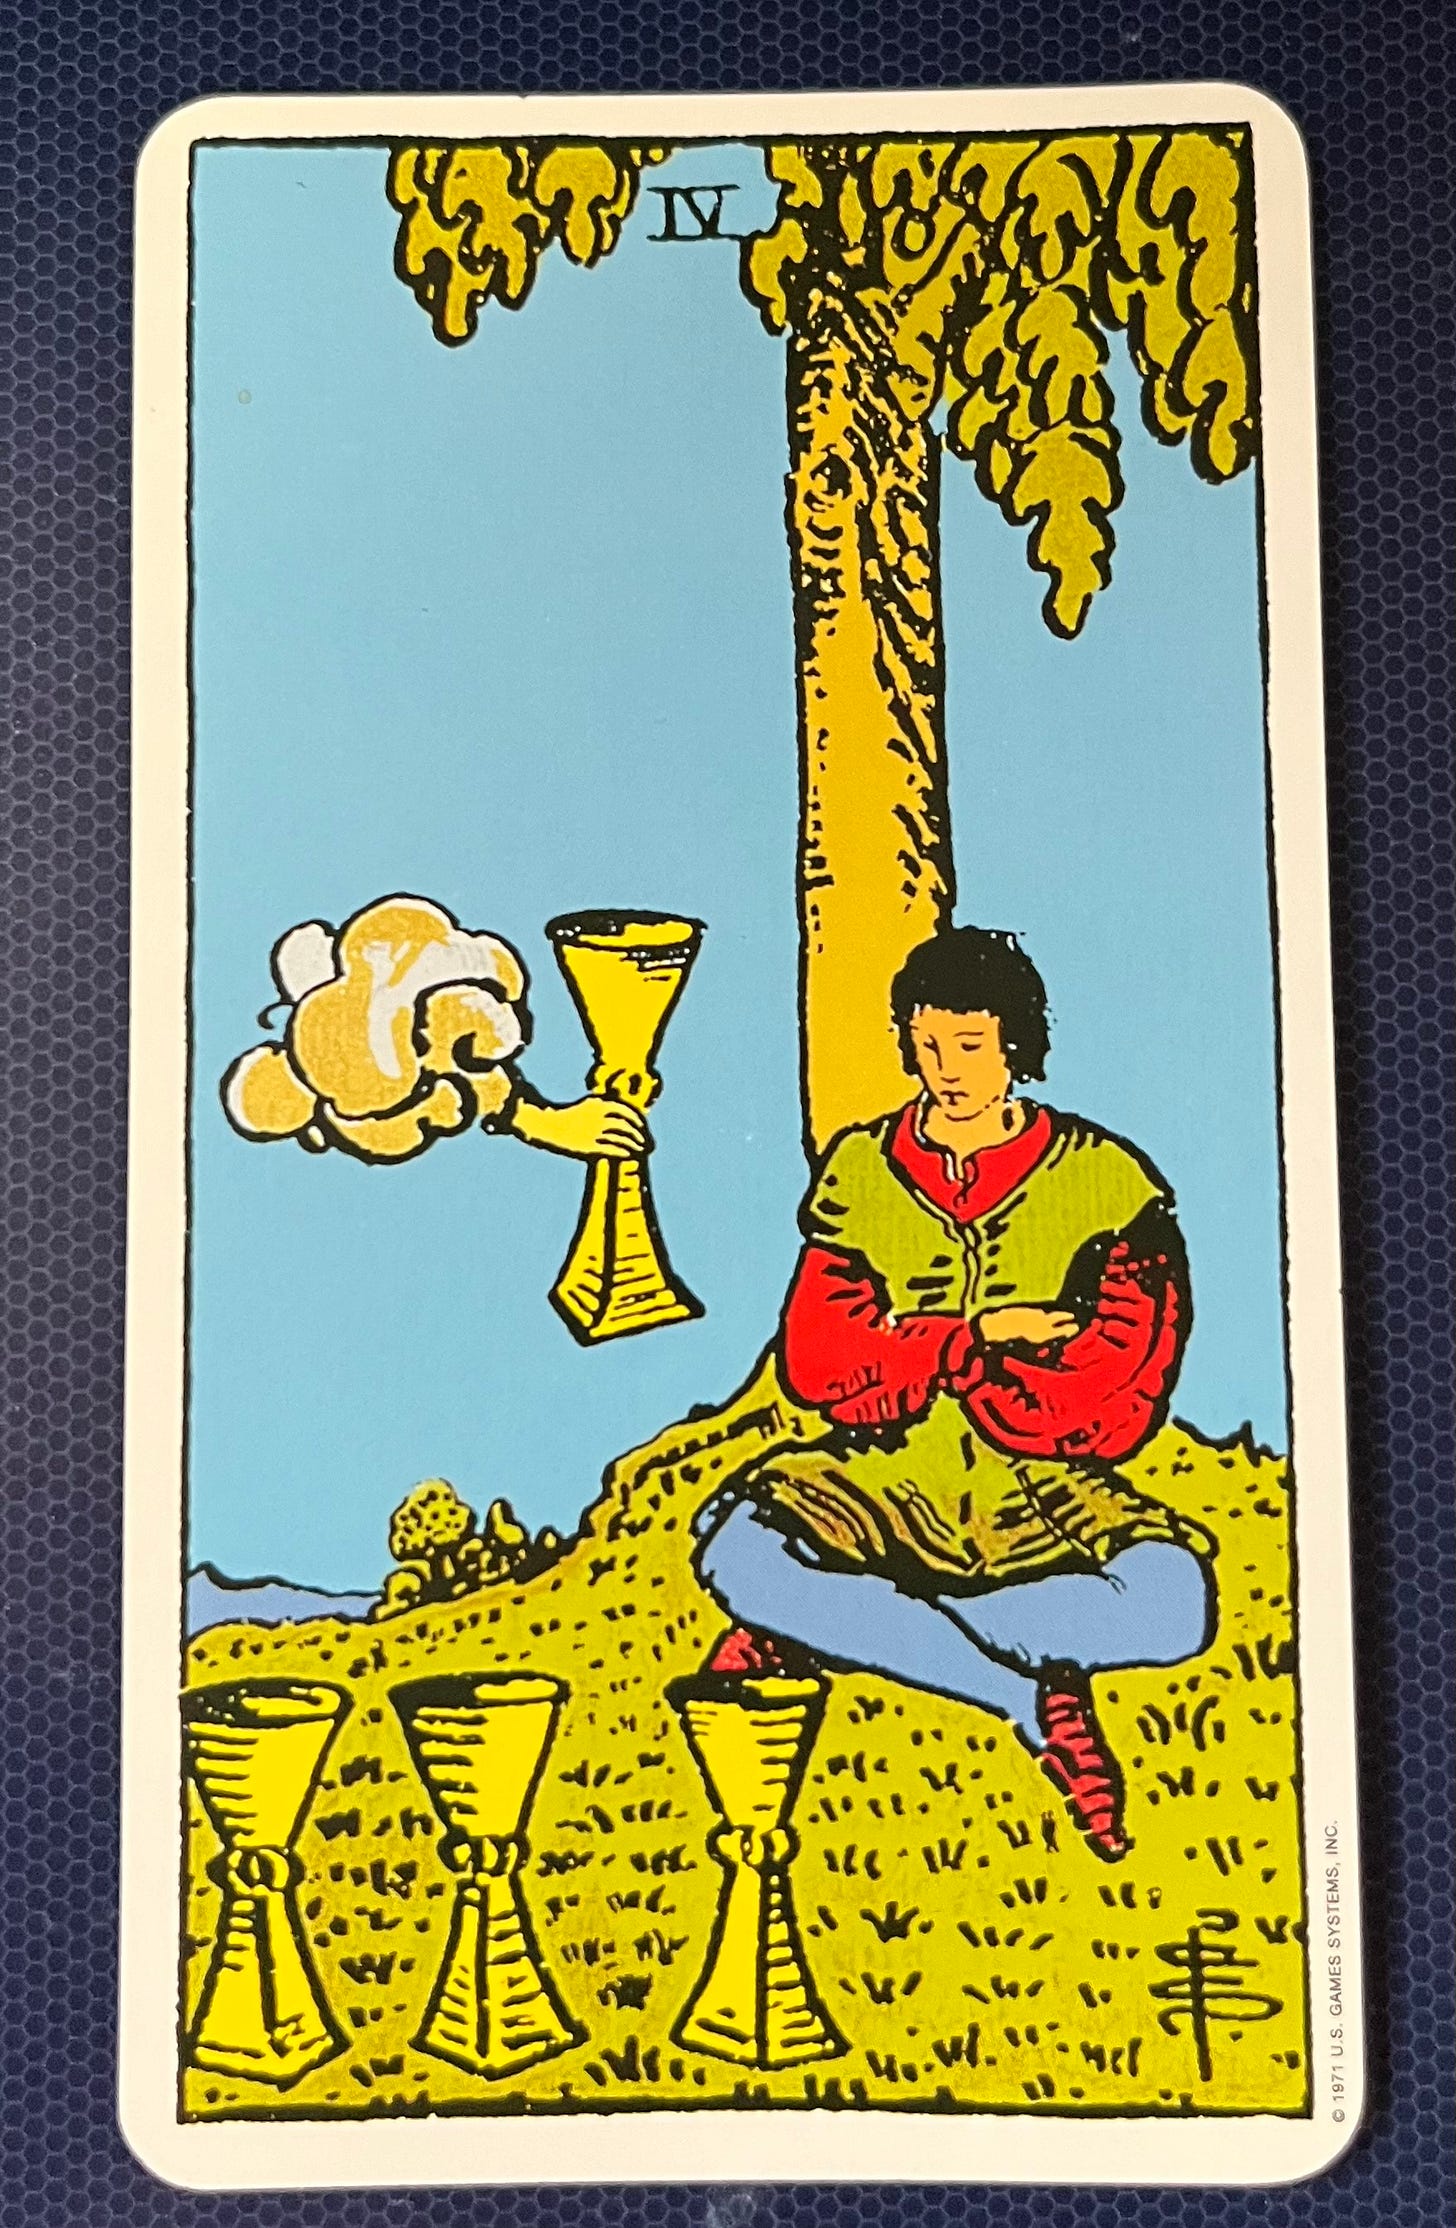 The image is of a tarot card, specifically the Four of Cups. It depicts a person sitting under a large tree with abundant foliage. The individual is holding one golden chalice and there are three additional chalices on the ground beside them. Above in the sky, there’s a cloud from which an arm extends offering yet another golden chalice to the individual. The background is blue with a white border around the edge of the card